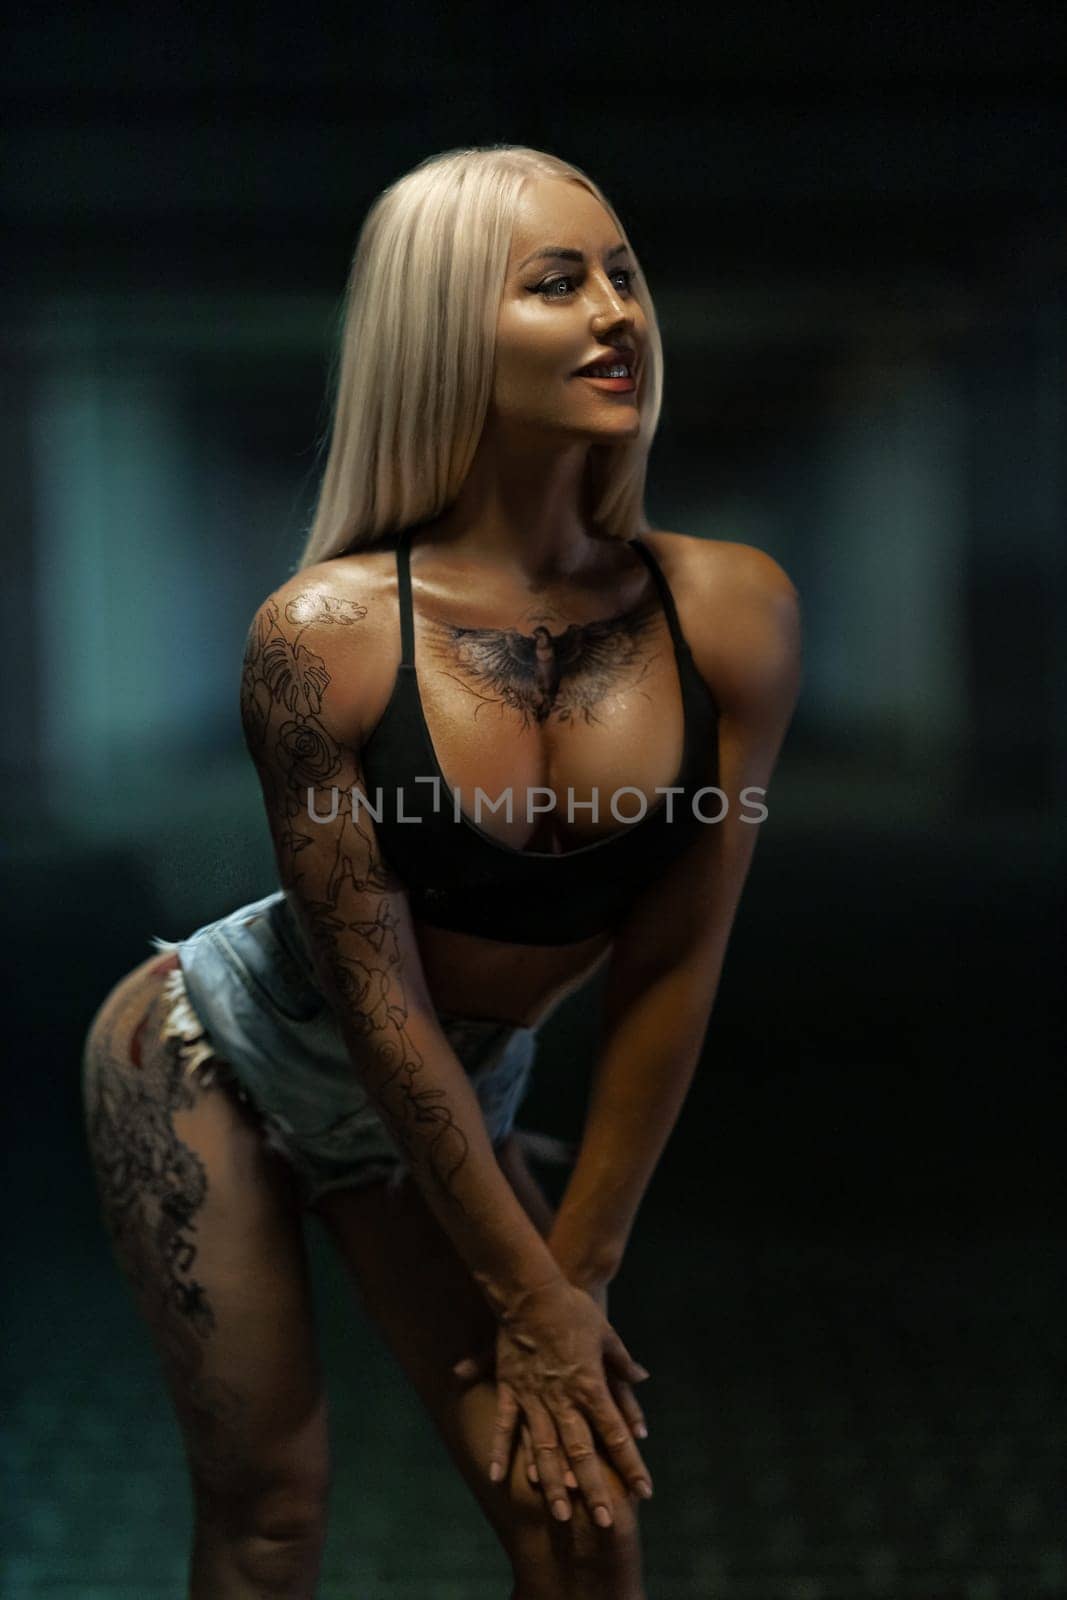 Sexy blonde woman fitness model in denim shorts and black top poses with both hands on her leg, showing off her beautiful silicone breasts with a bird tattoo